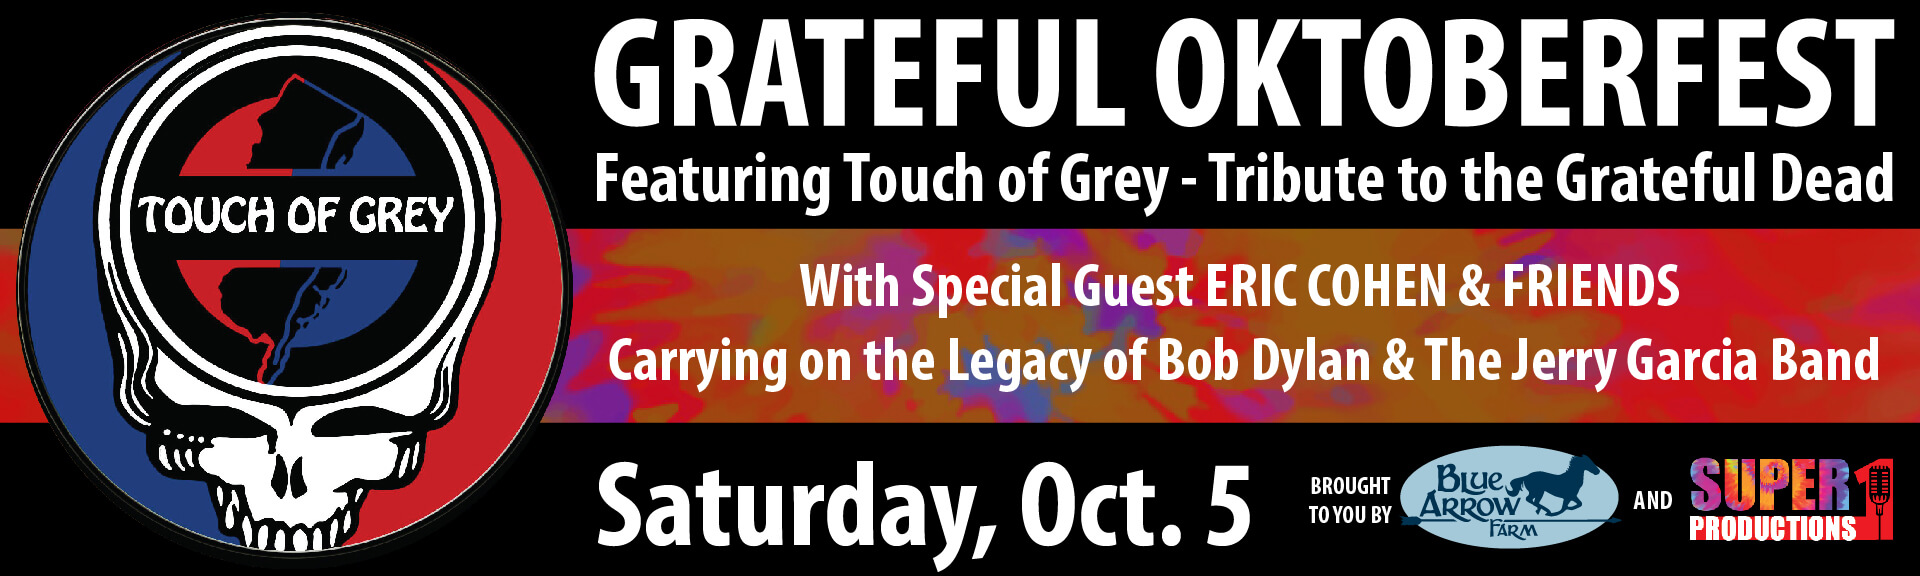 Grateful Oktoberfest featuring Touch of Grey - Tribute to the Grateful Dead. With special guest Eric Cohen & Friends carrying on the legacy of Bob Dylan and the Jerry Garcia Band. Saturday, October 5